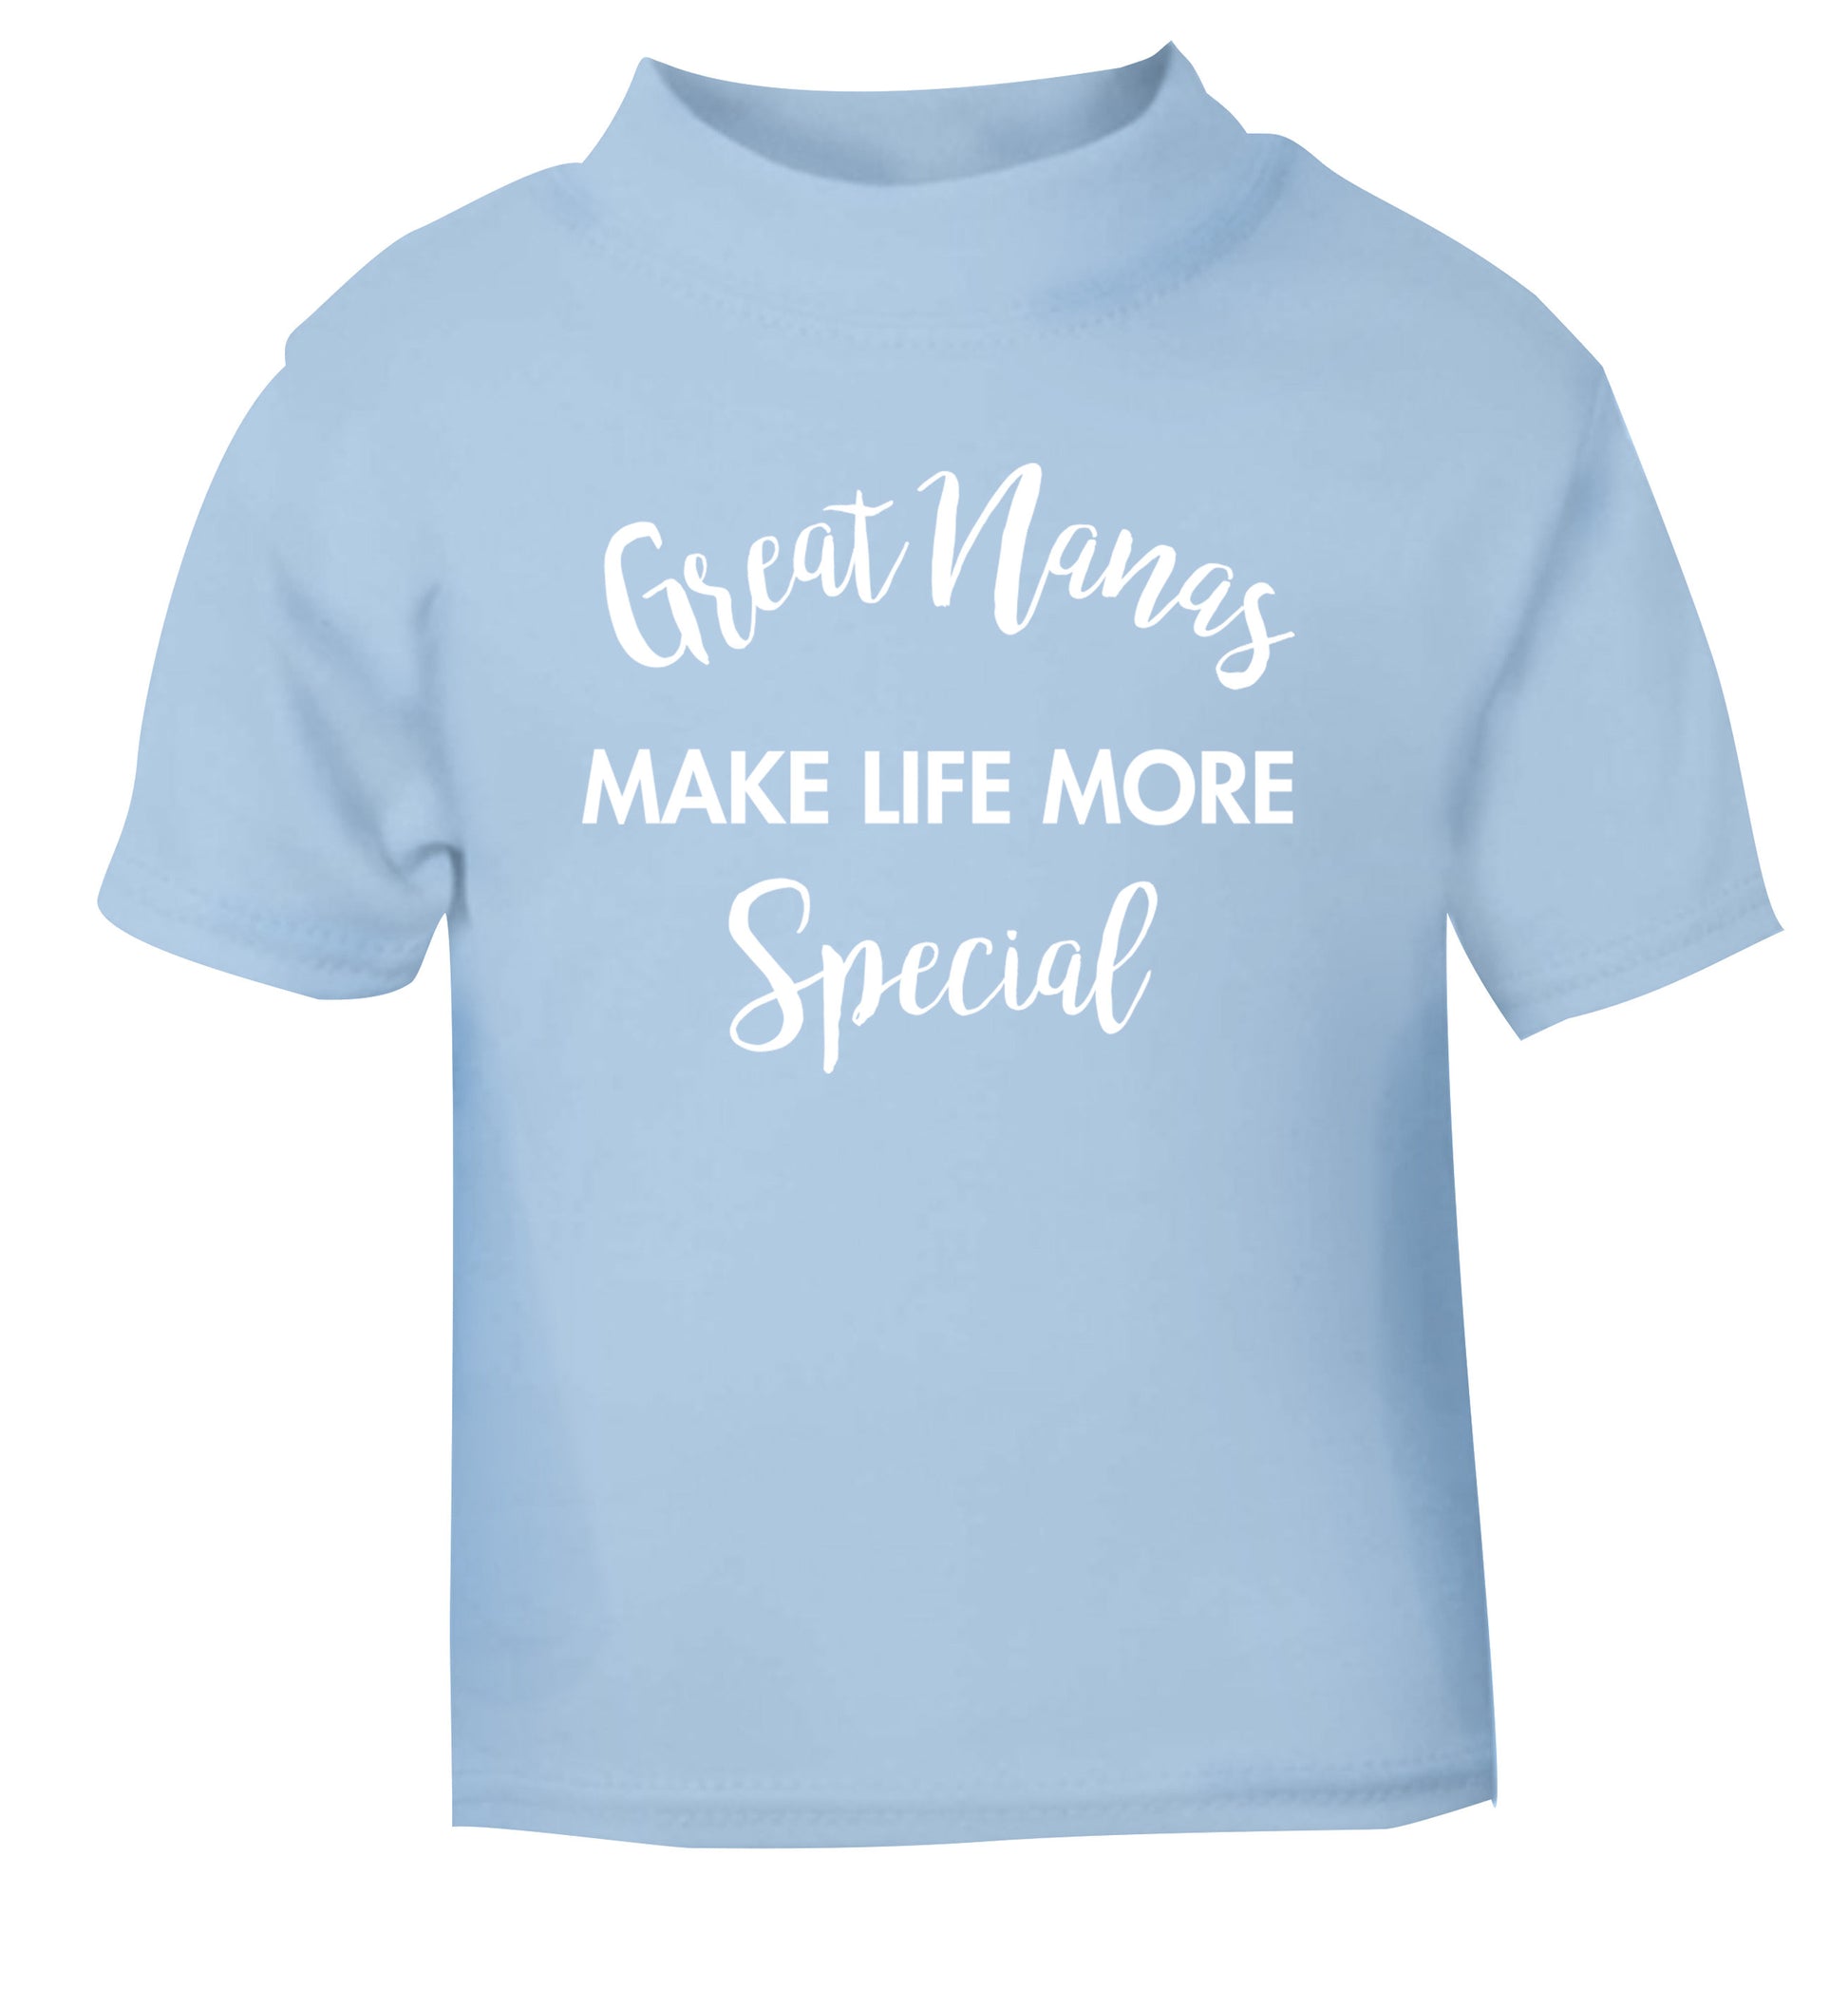 Great nanas make life more special light blue Baby Toddler Tshirt 2 Years